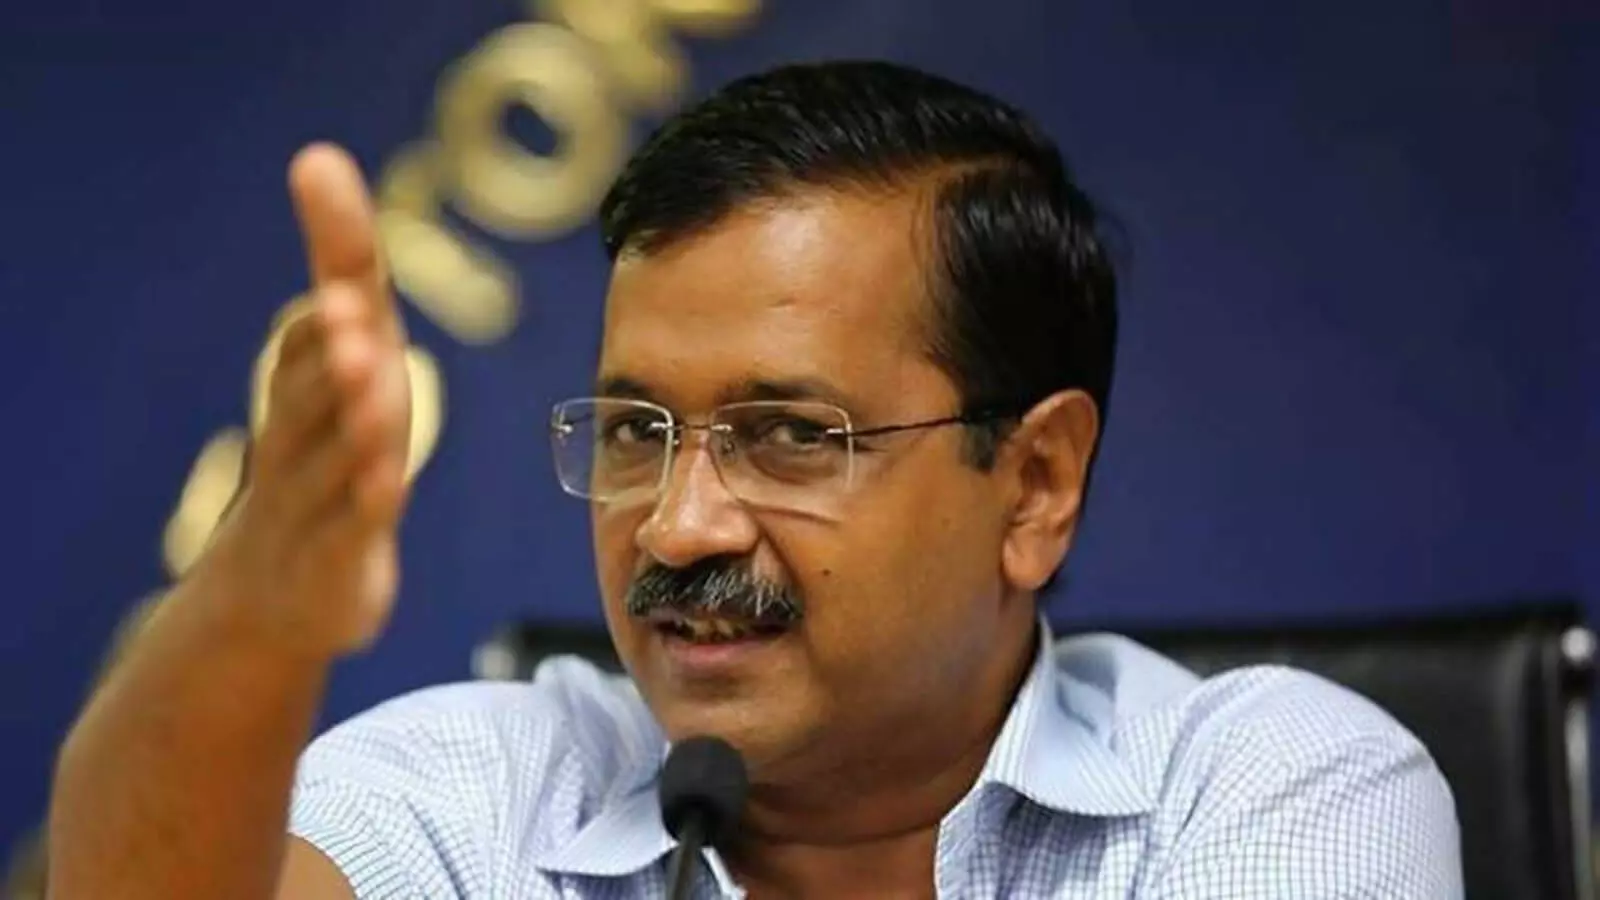 Delhi schools to remain shut for all classes in view of Covid-19: Kejriwal